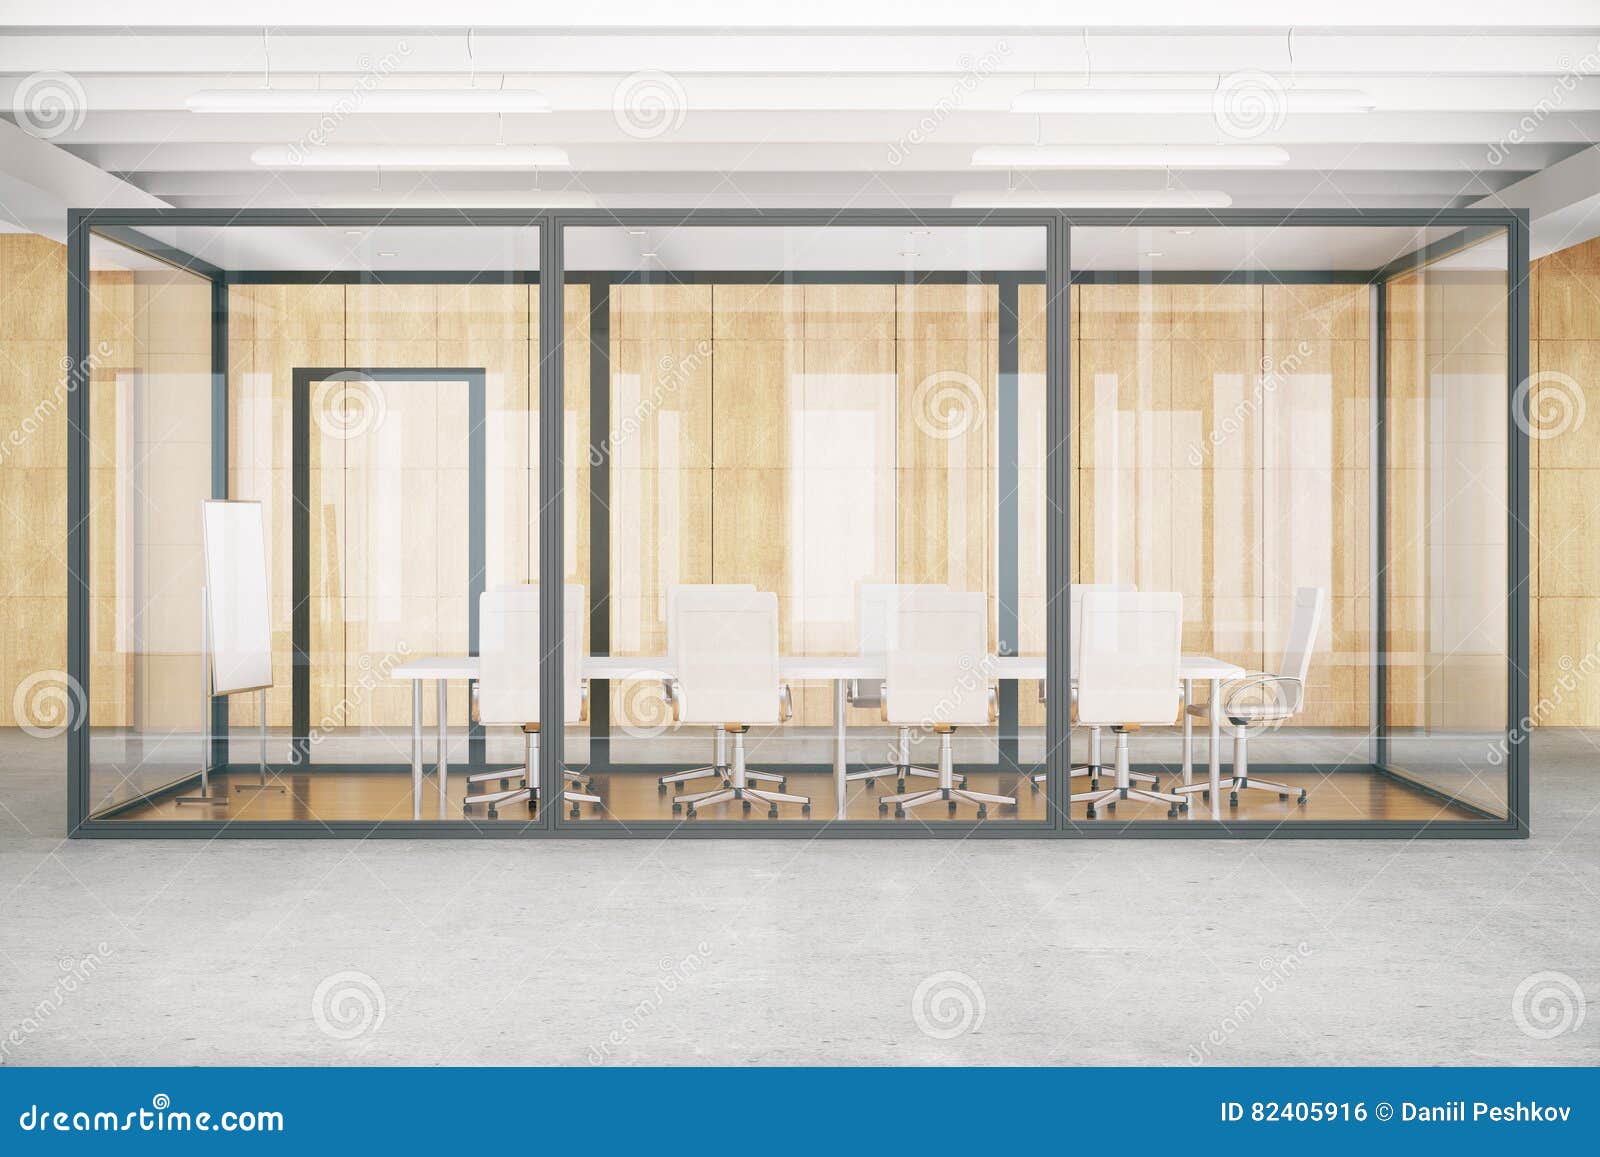 Conference Room Inside Glass Box Front Stock Illustration ...